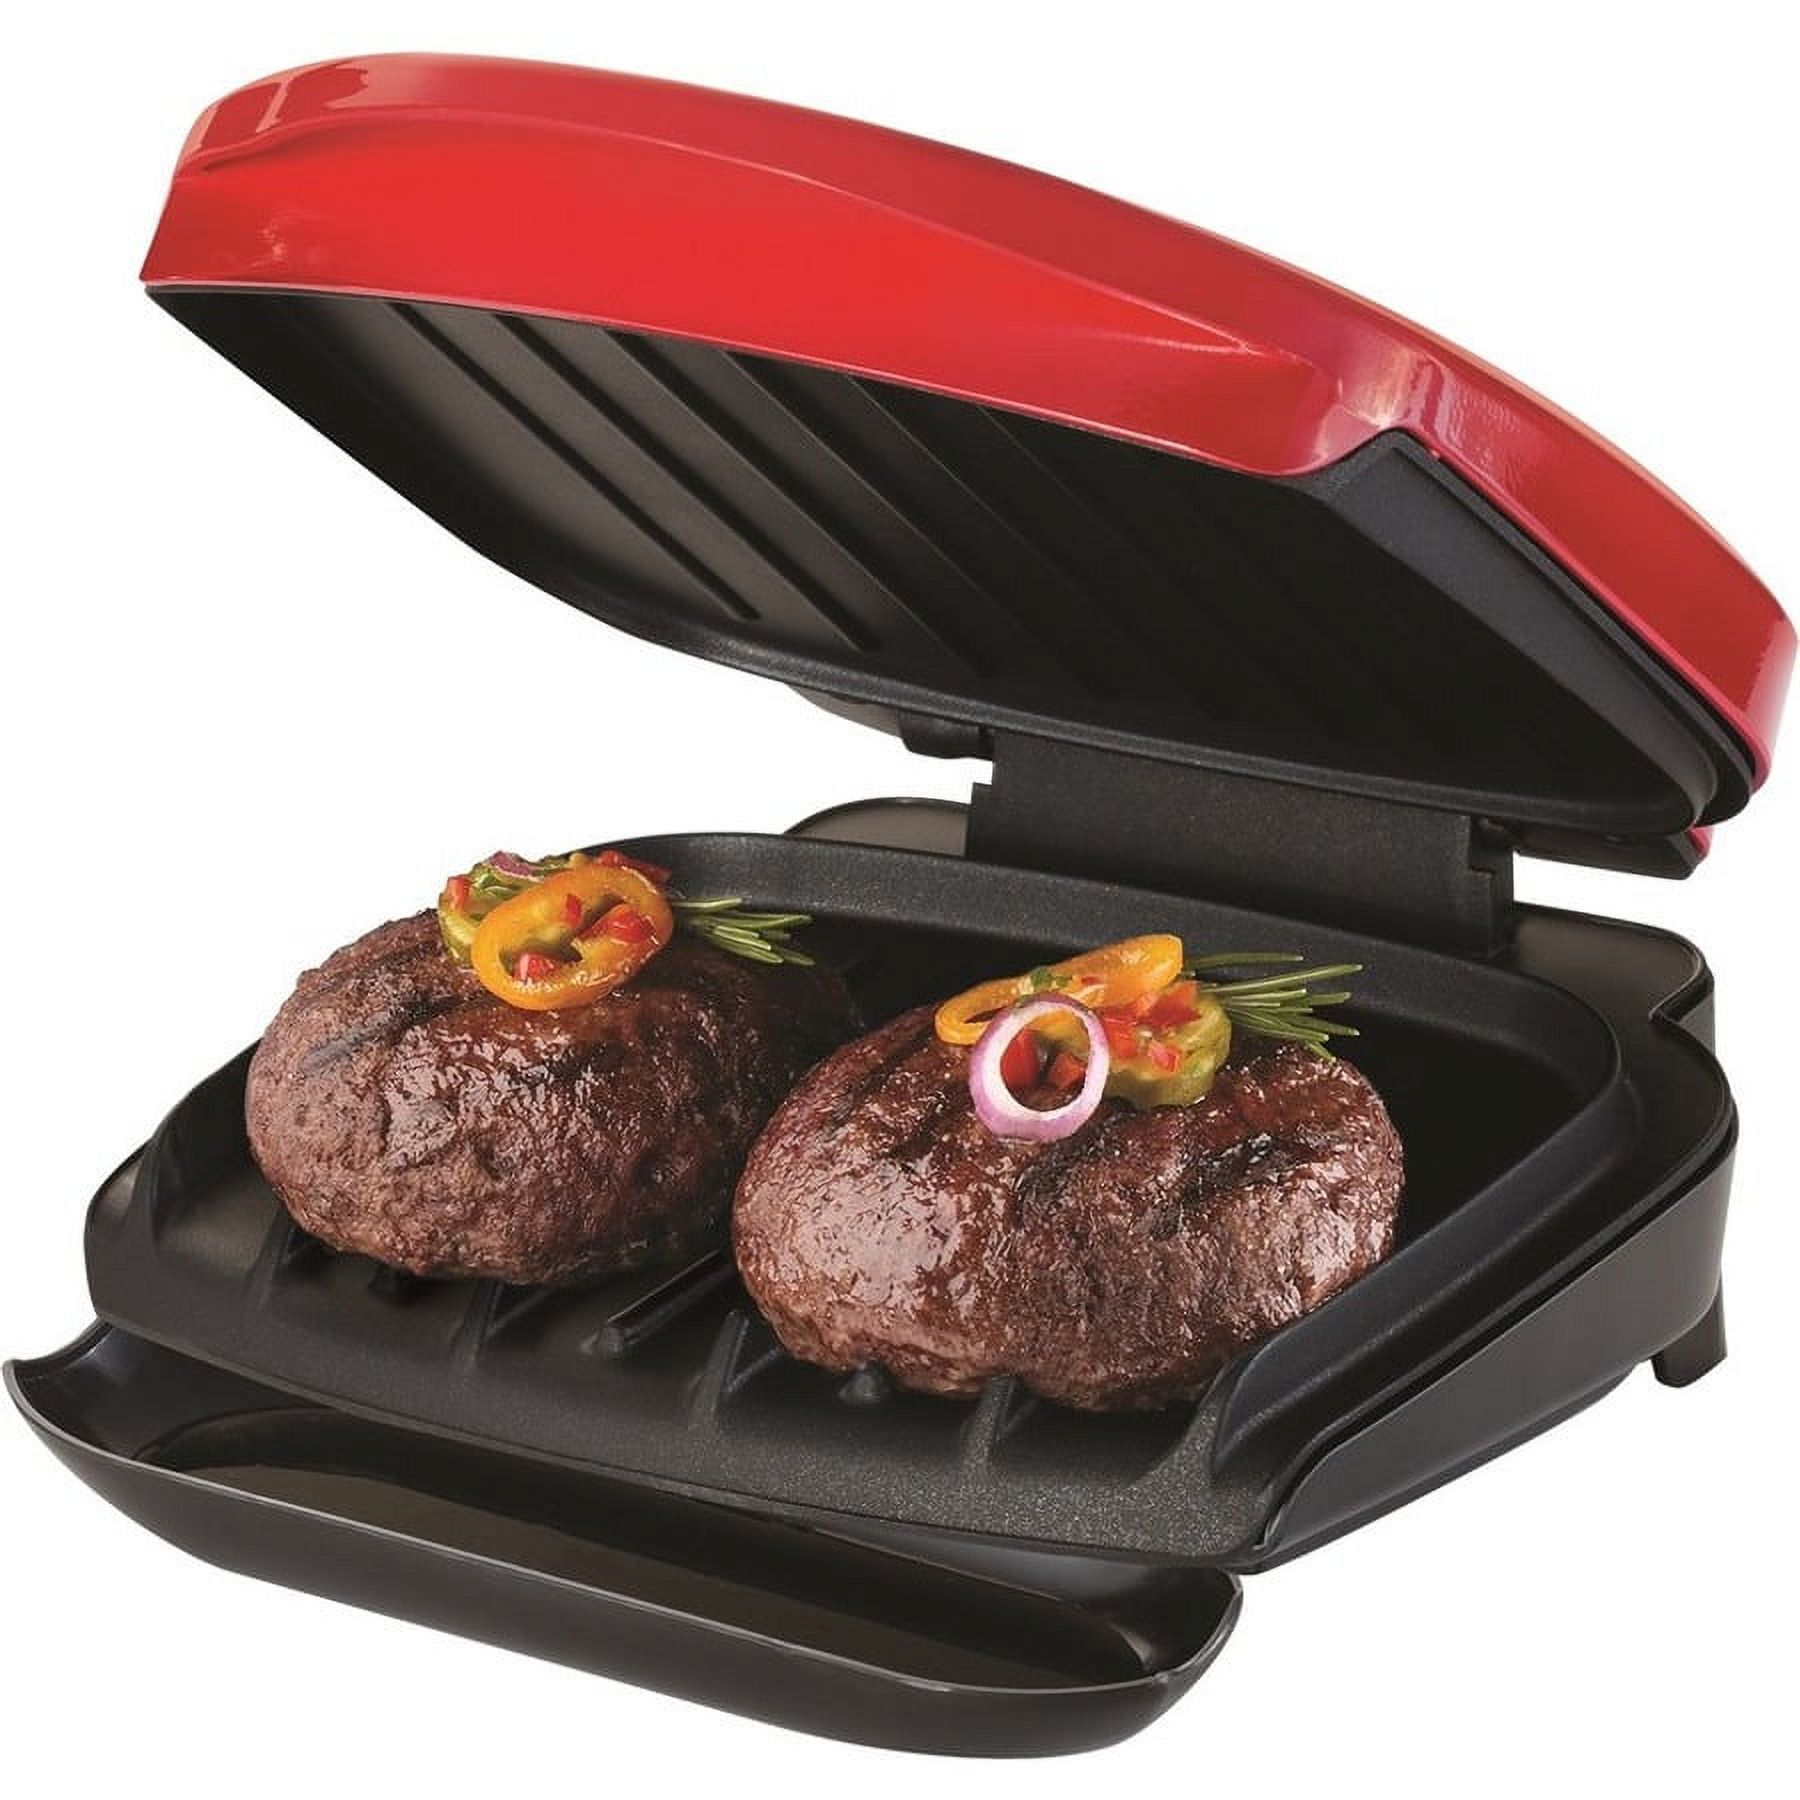 George Foreman 2-Serving Classic Plate Electric Indoor Grill and Panini Press, Red, GR10RM - image 2 of 11